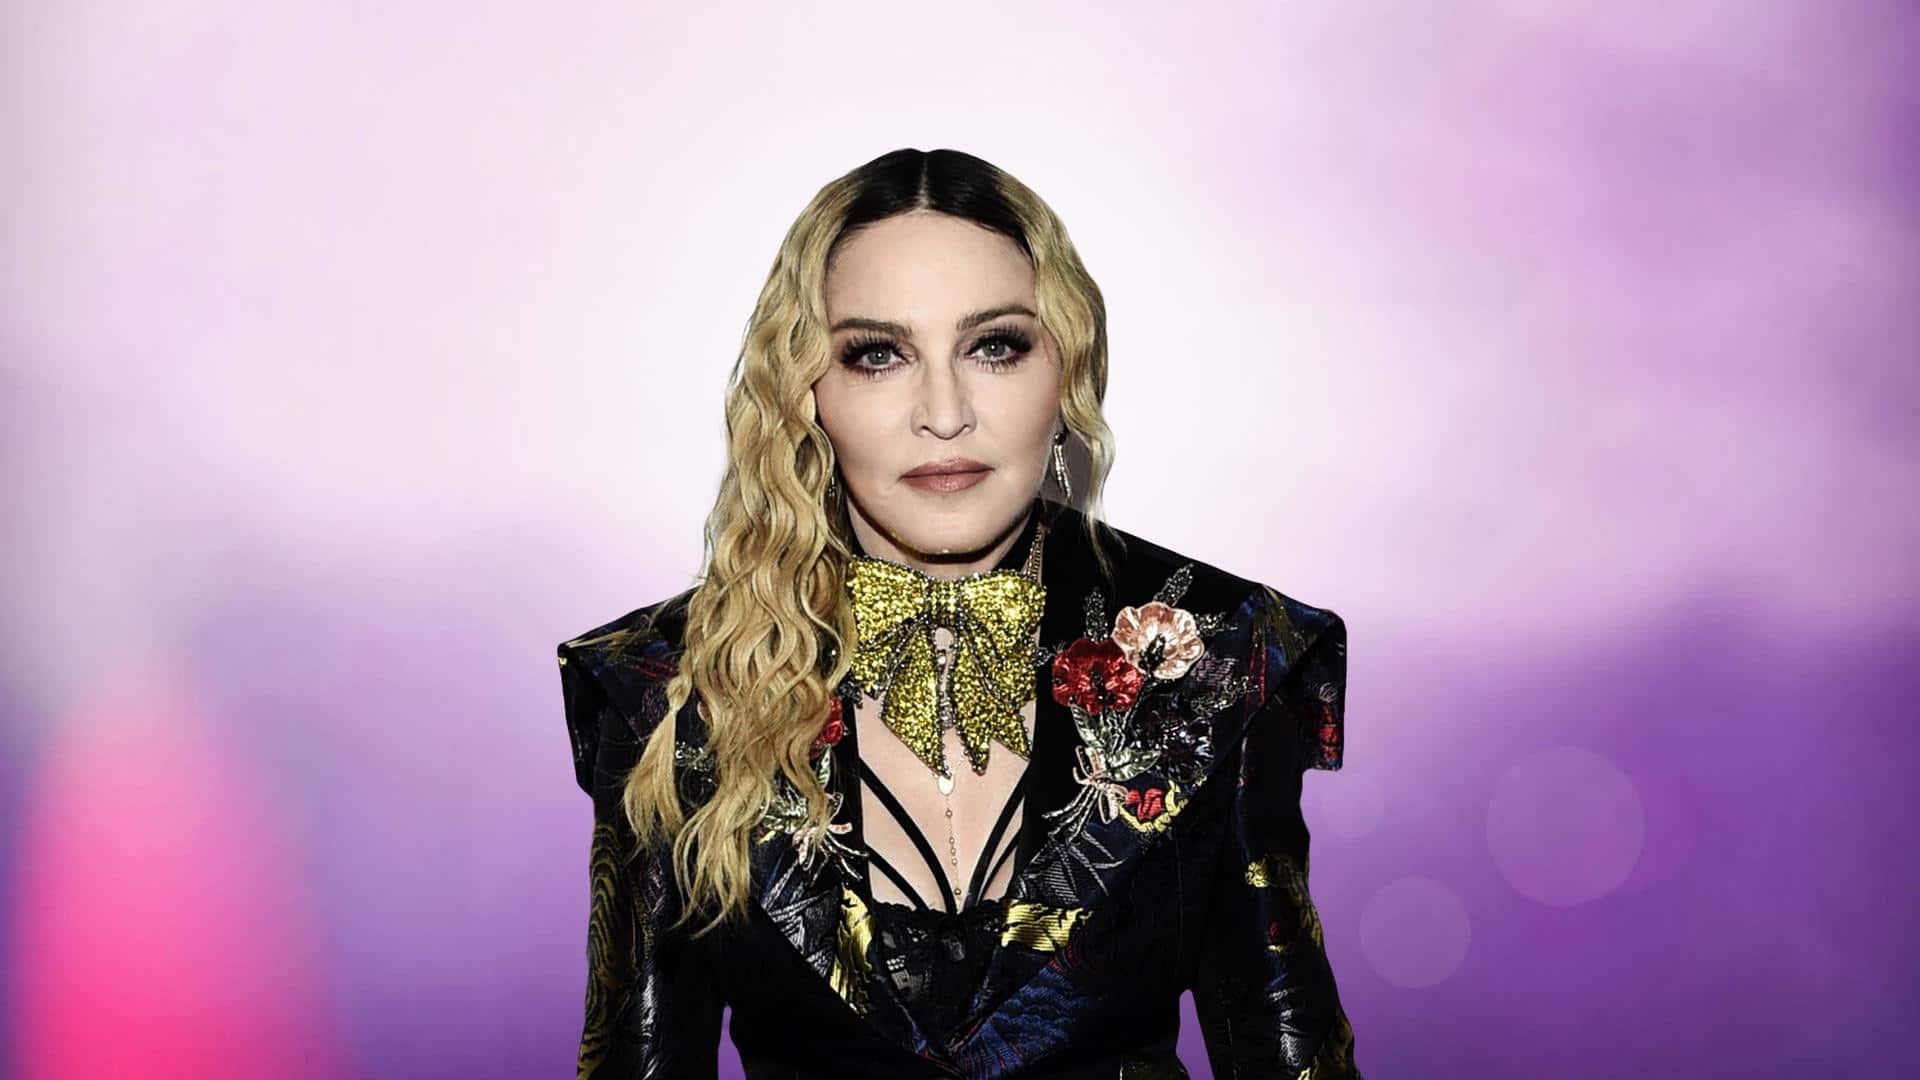 Madonna's most iconic songs you must listen to